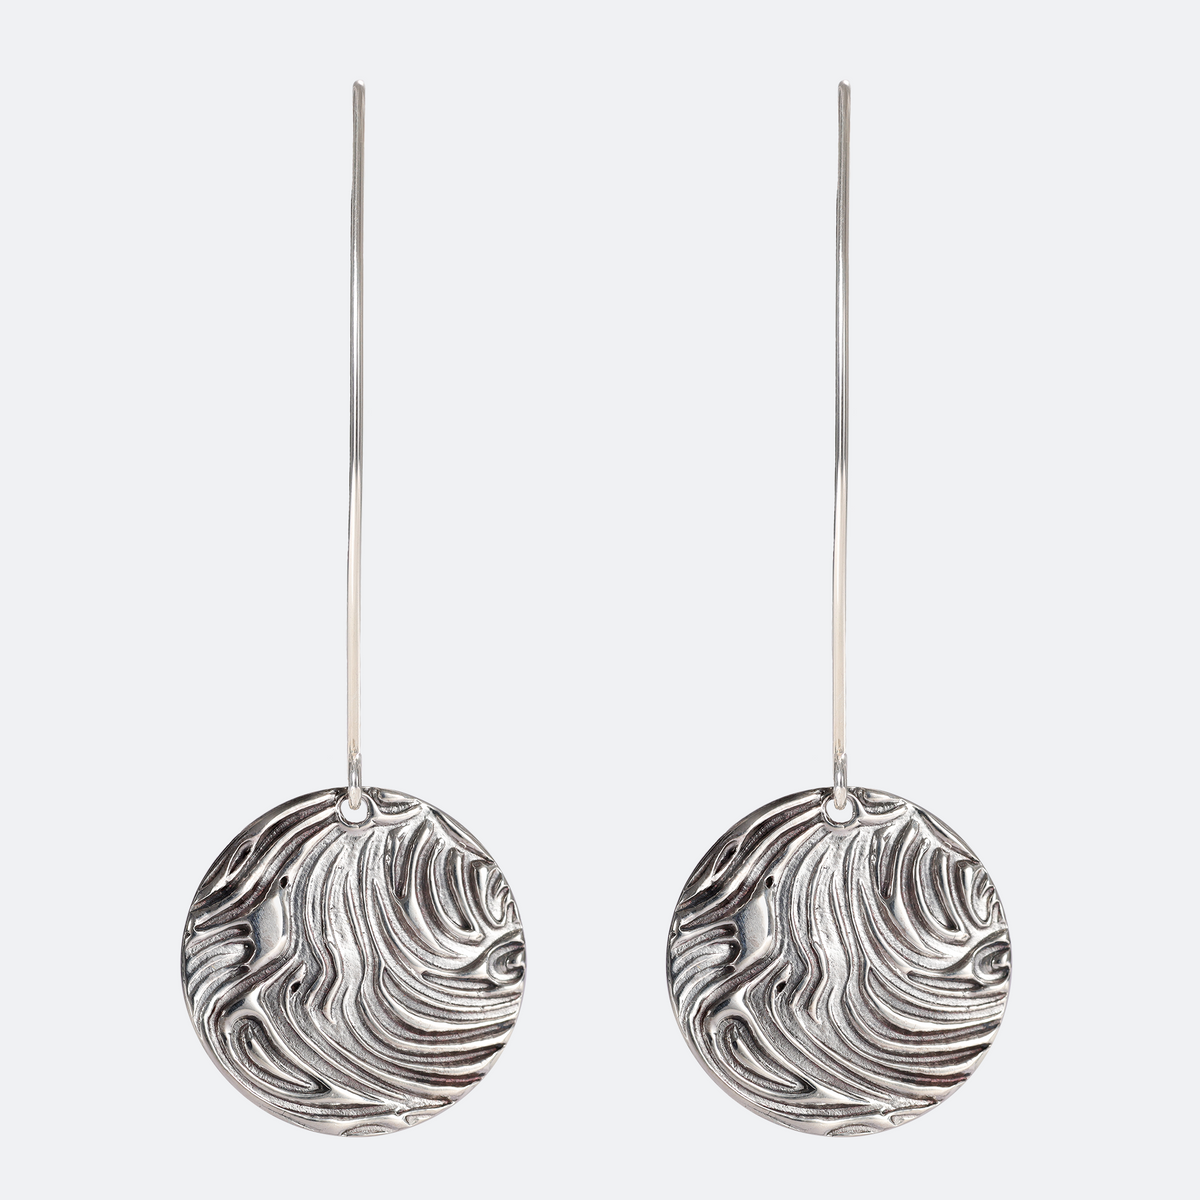 Wind Textured Large Sterling Silver Earrings on Long Ear Wires